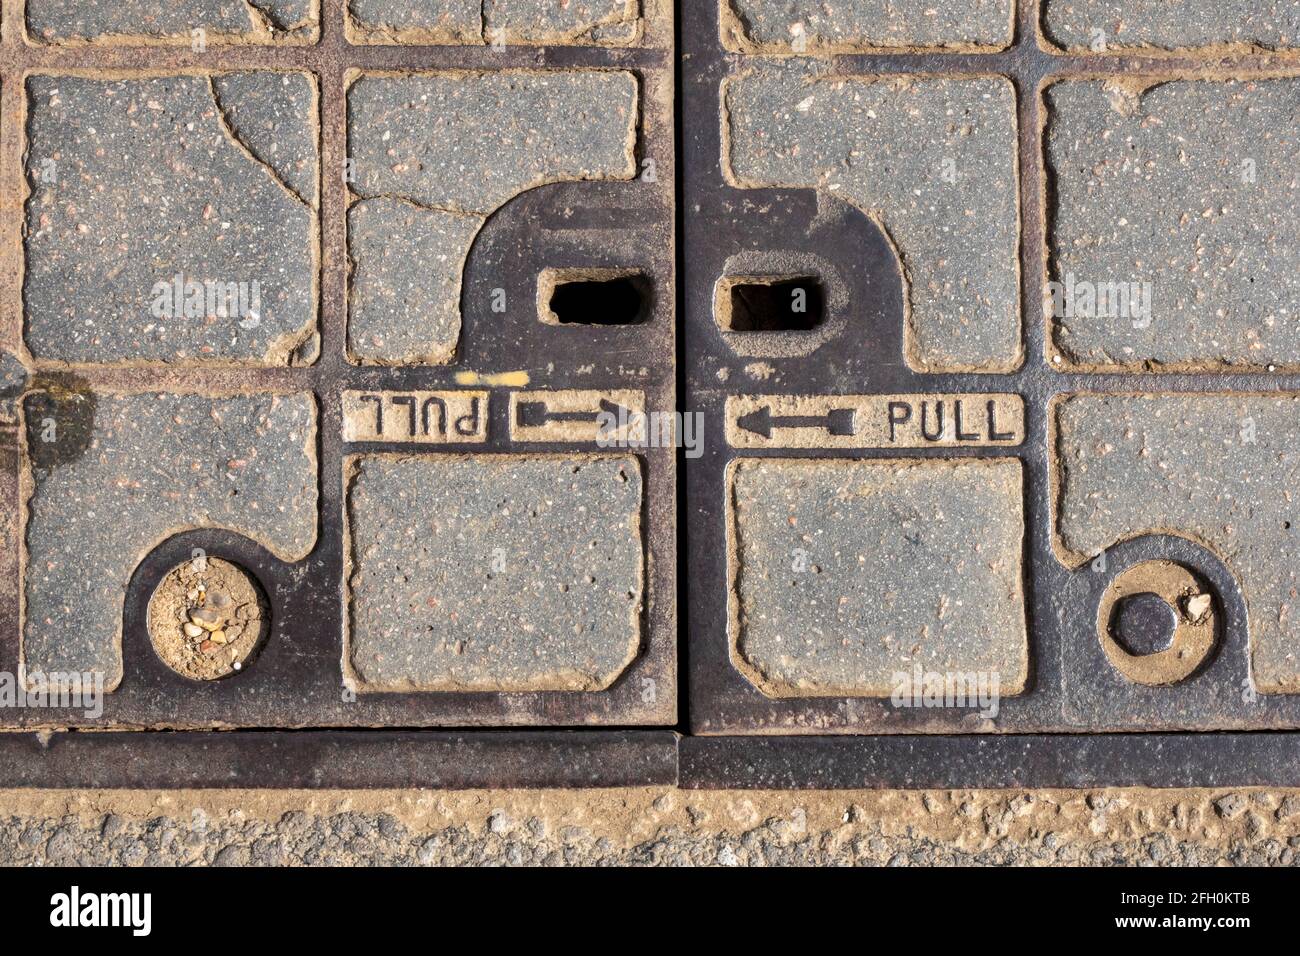 Post Office Telephones inspection cover in cast iron and concrete fitted into road surface Stock Photo